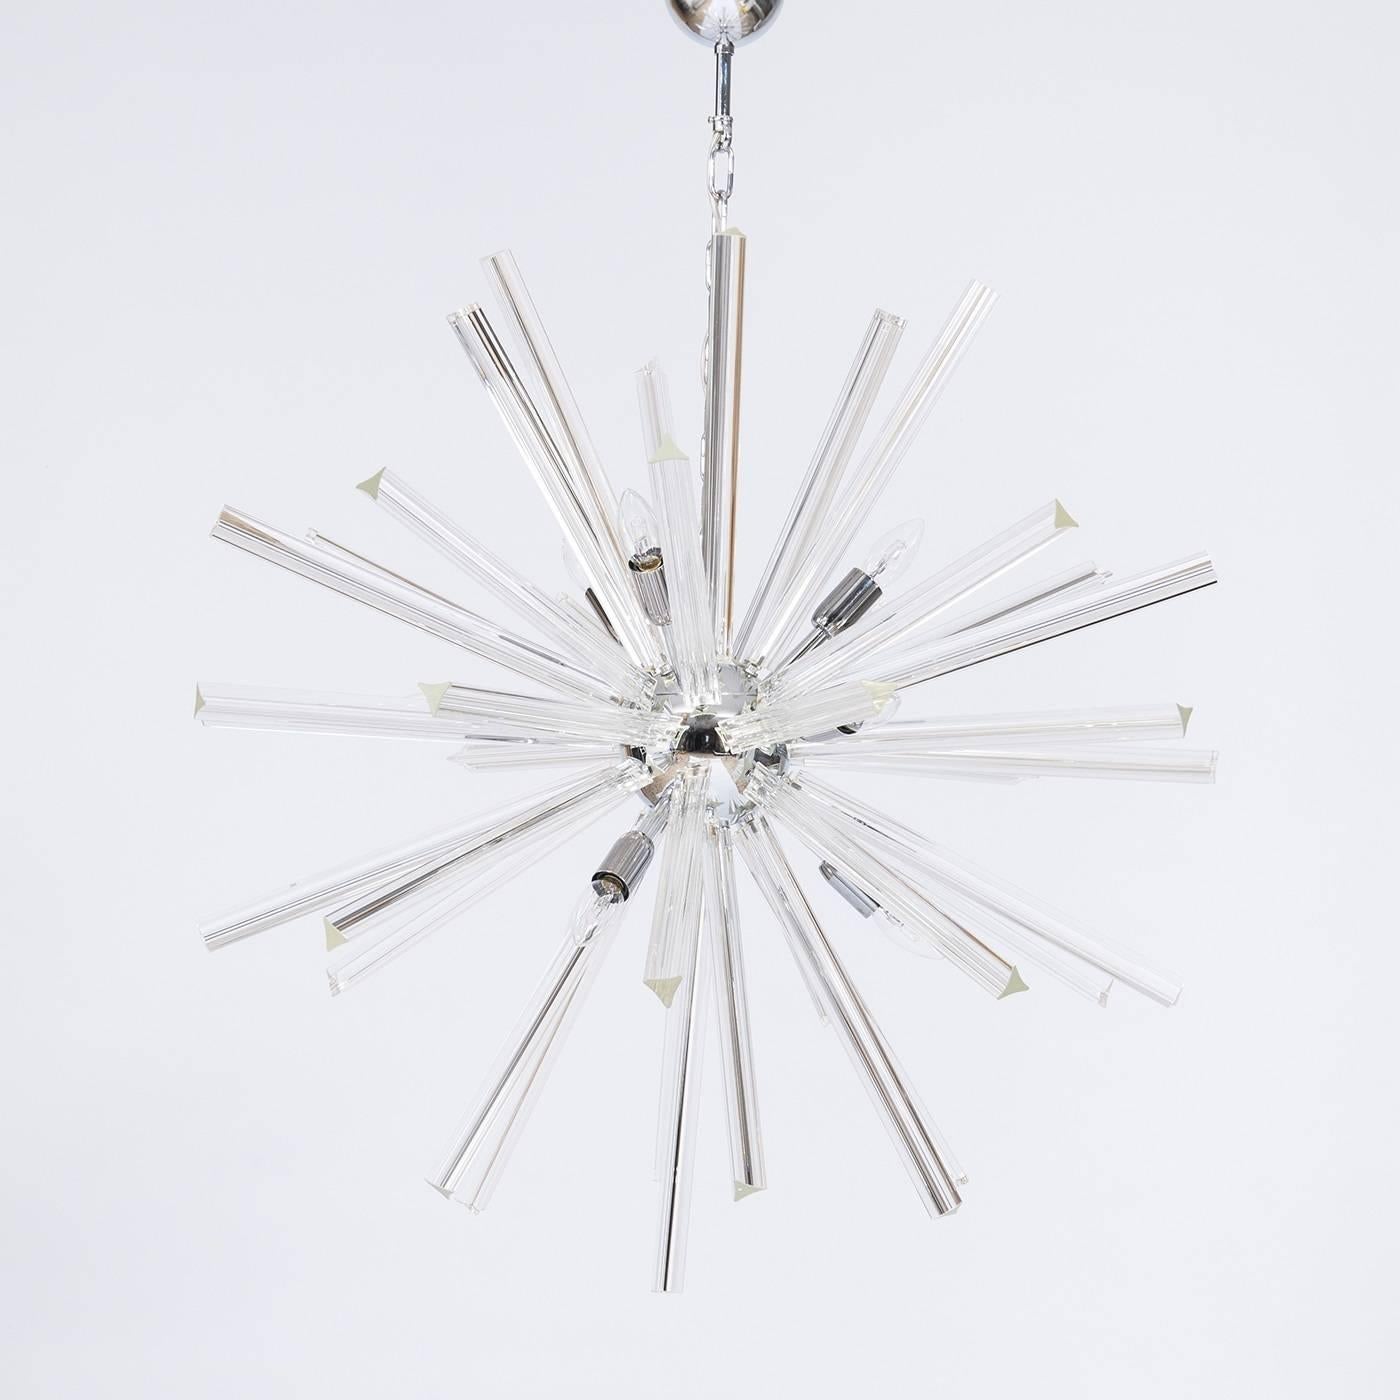 Spectacular Italian Venetian Sputnik chandelier in Murano glass, composed of transparent Triedro elements, supported by an elegant chrome frame. The chandelier is product by Giovanni Dalla Fina company in the Murano island of Venice, product and